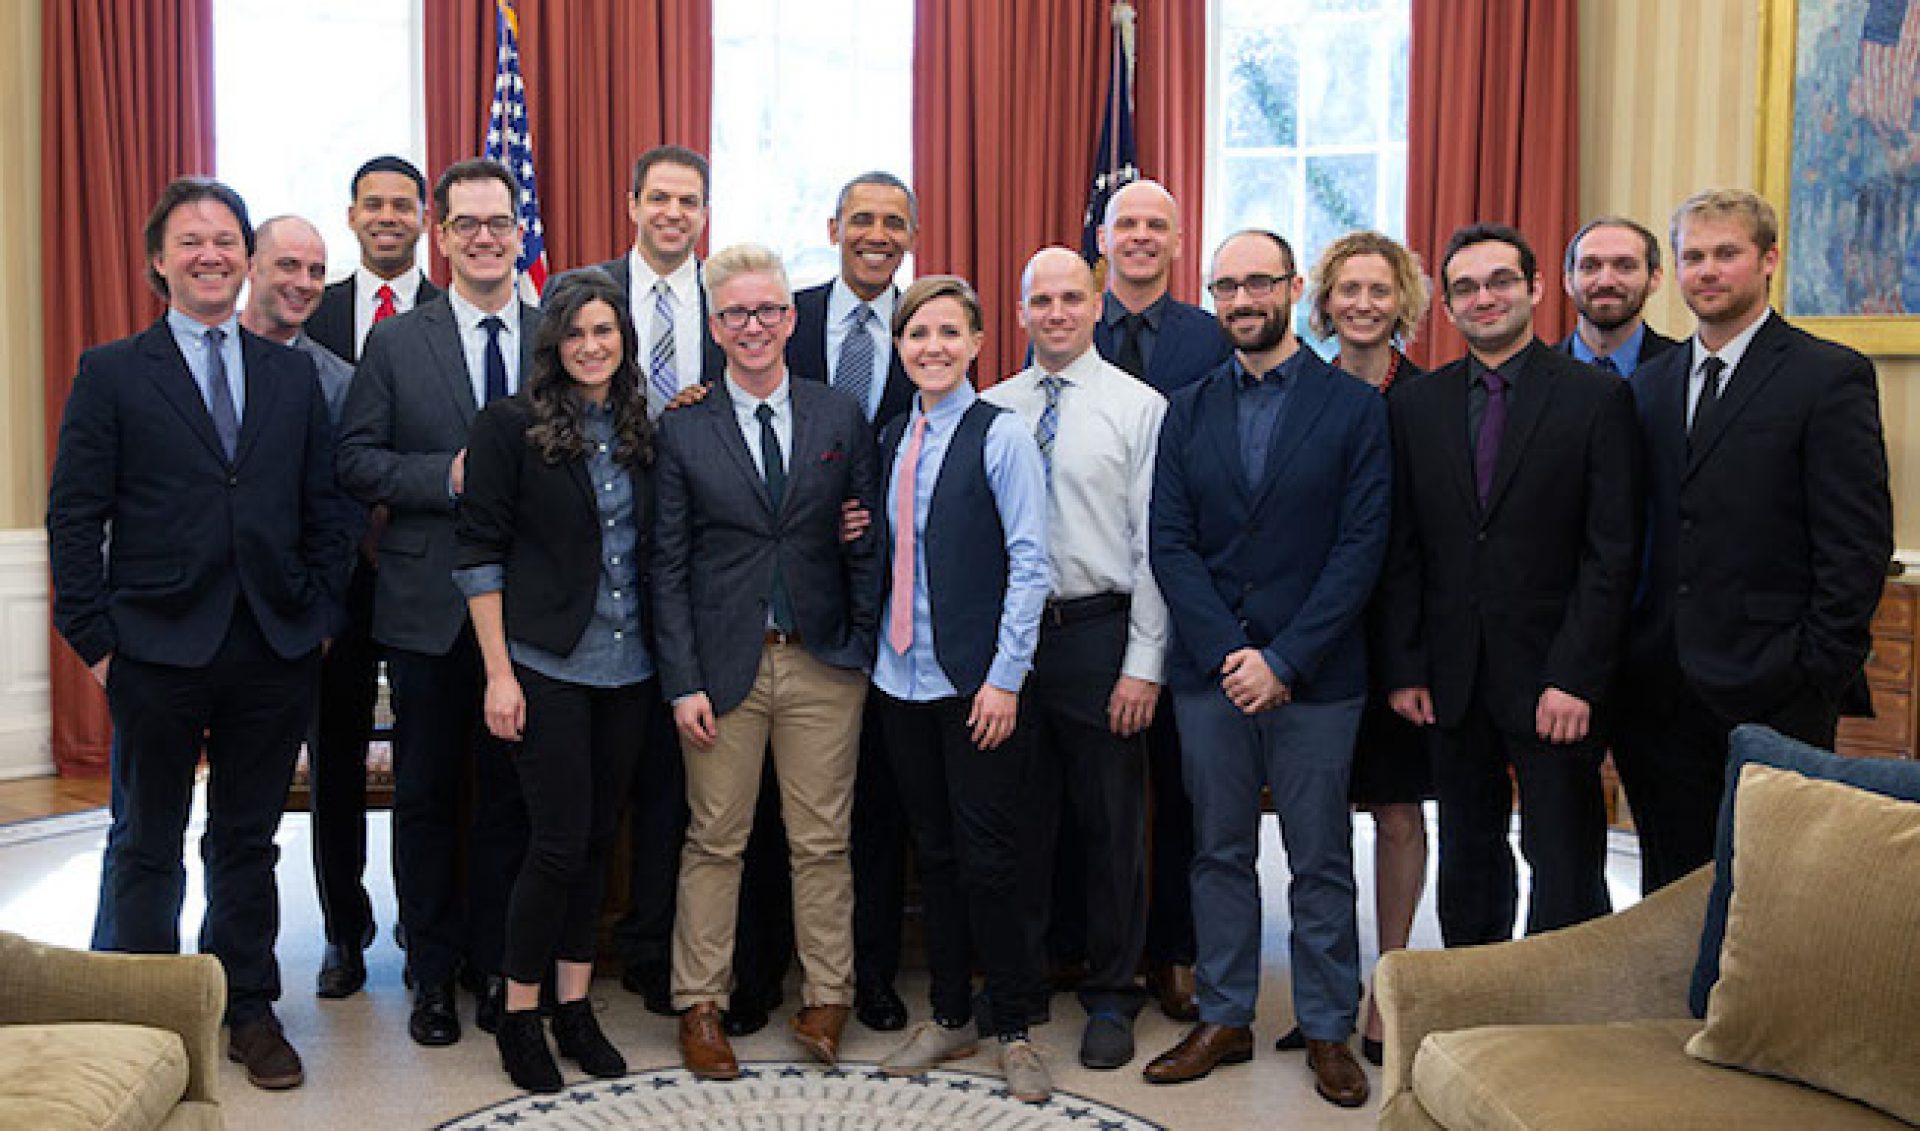 Obama Meets With YouTube Advisors On How To Reach Online Audiences